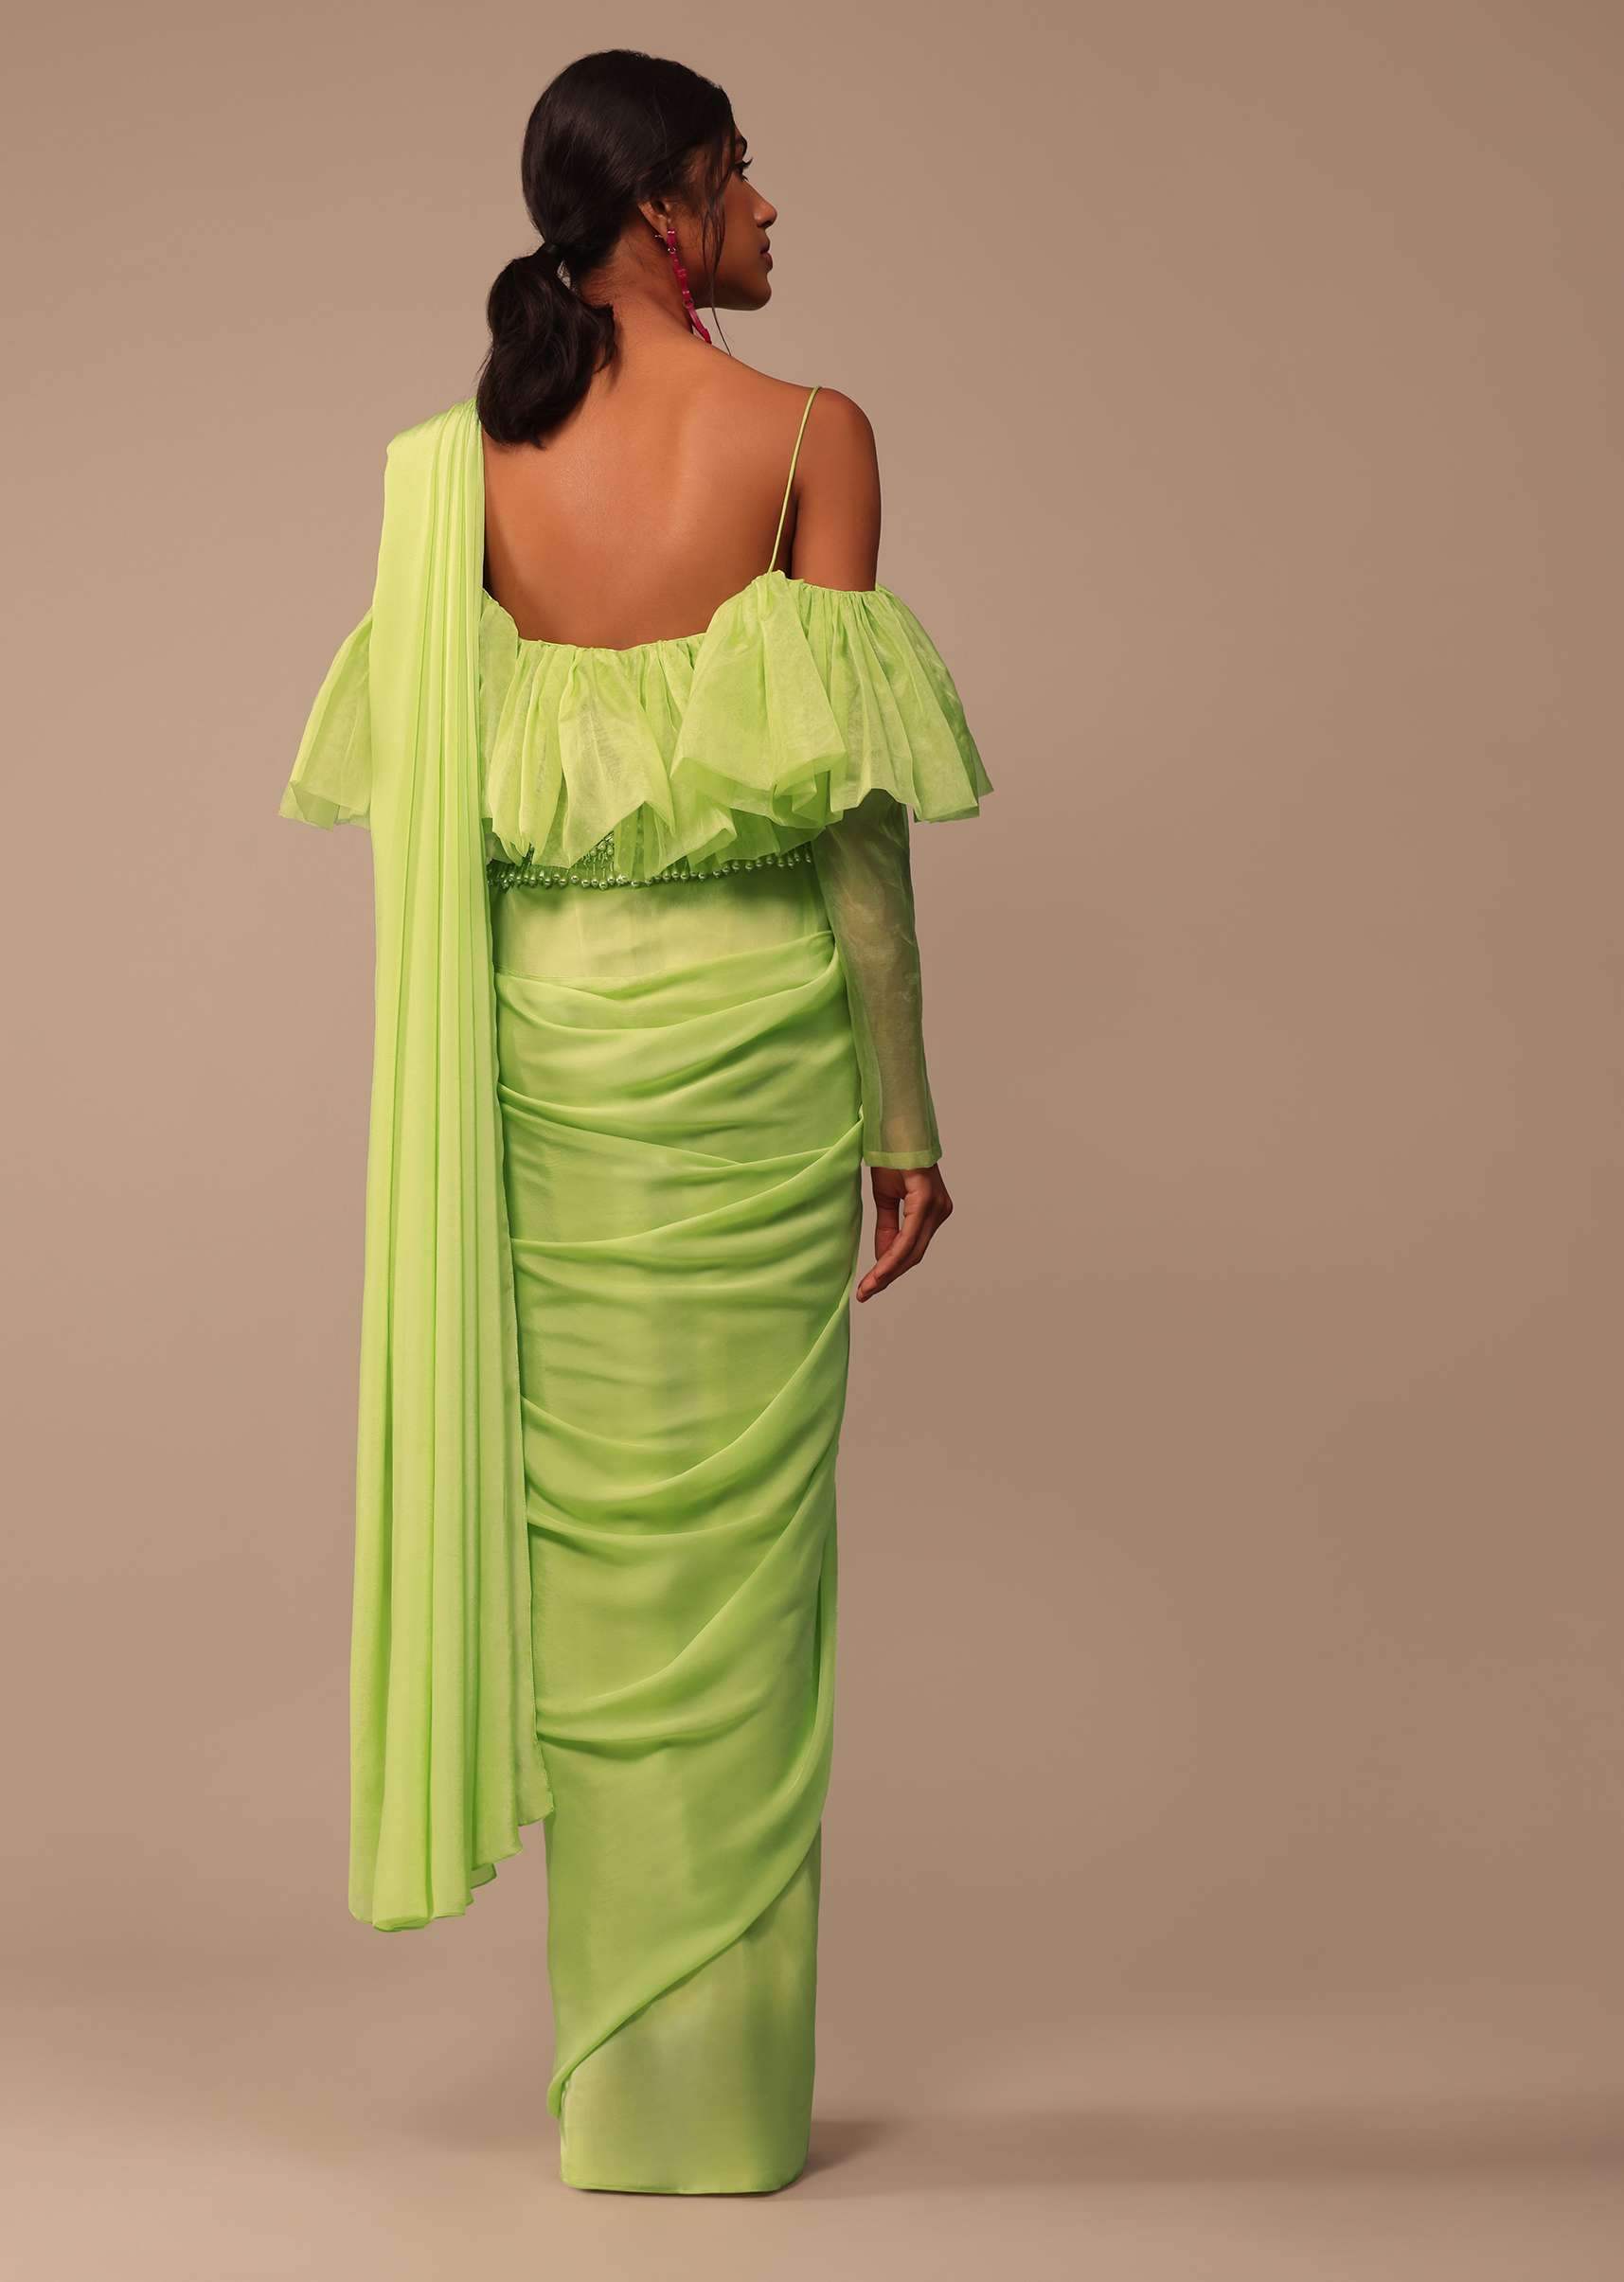 Fern Green Crepe Saree With Organza Frilled Blouse